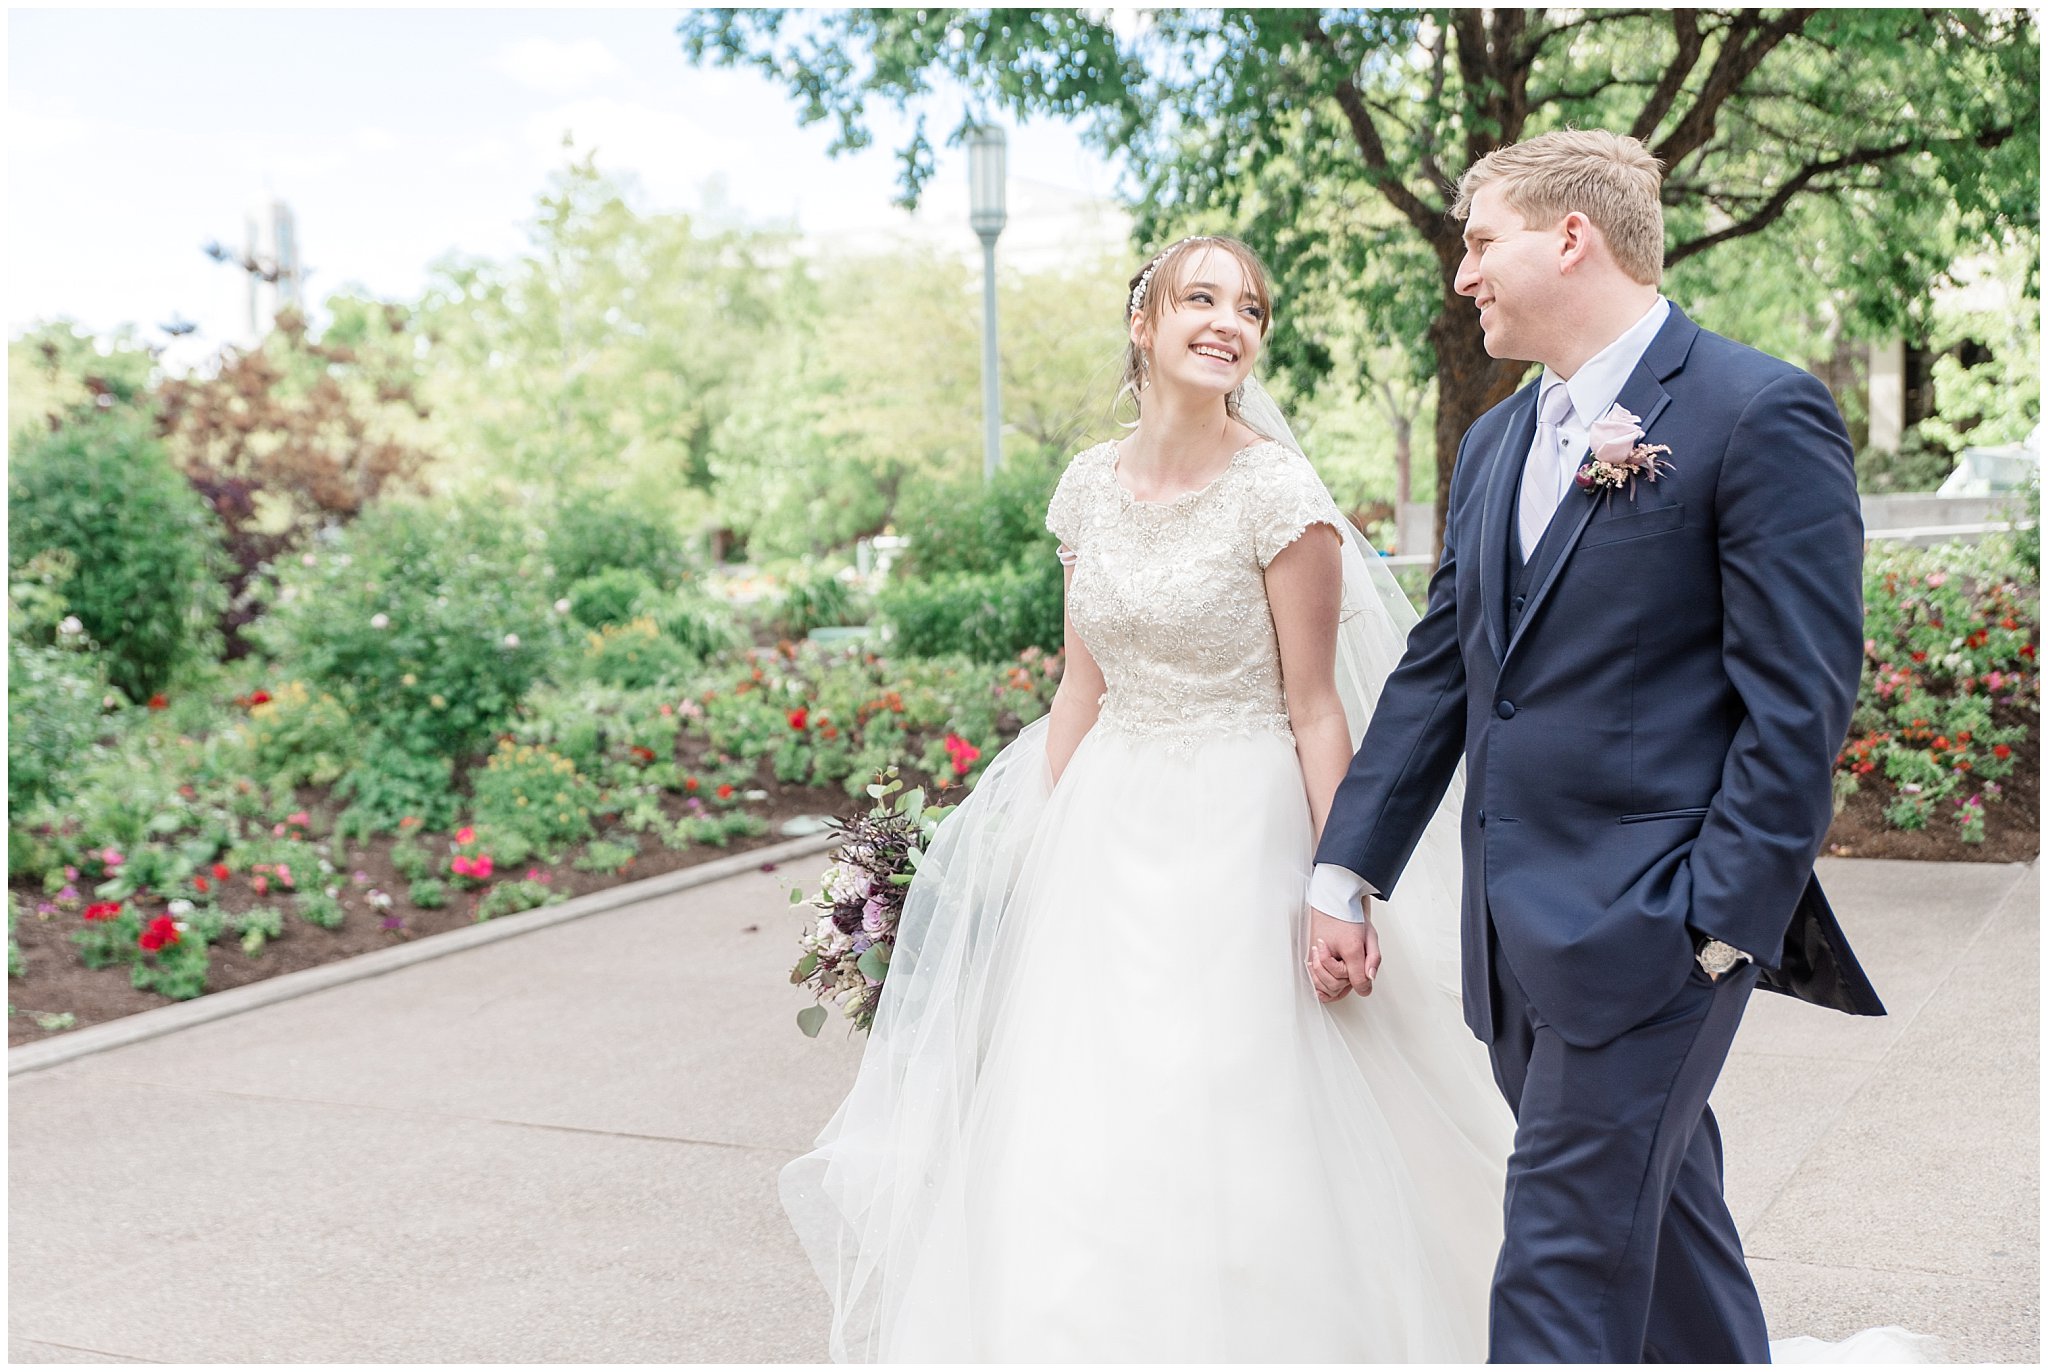 Bride and groom walking the grounds at the Salt Lake Temple | Candid wedding photography